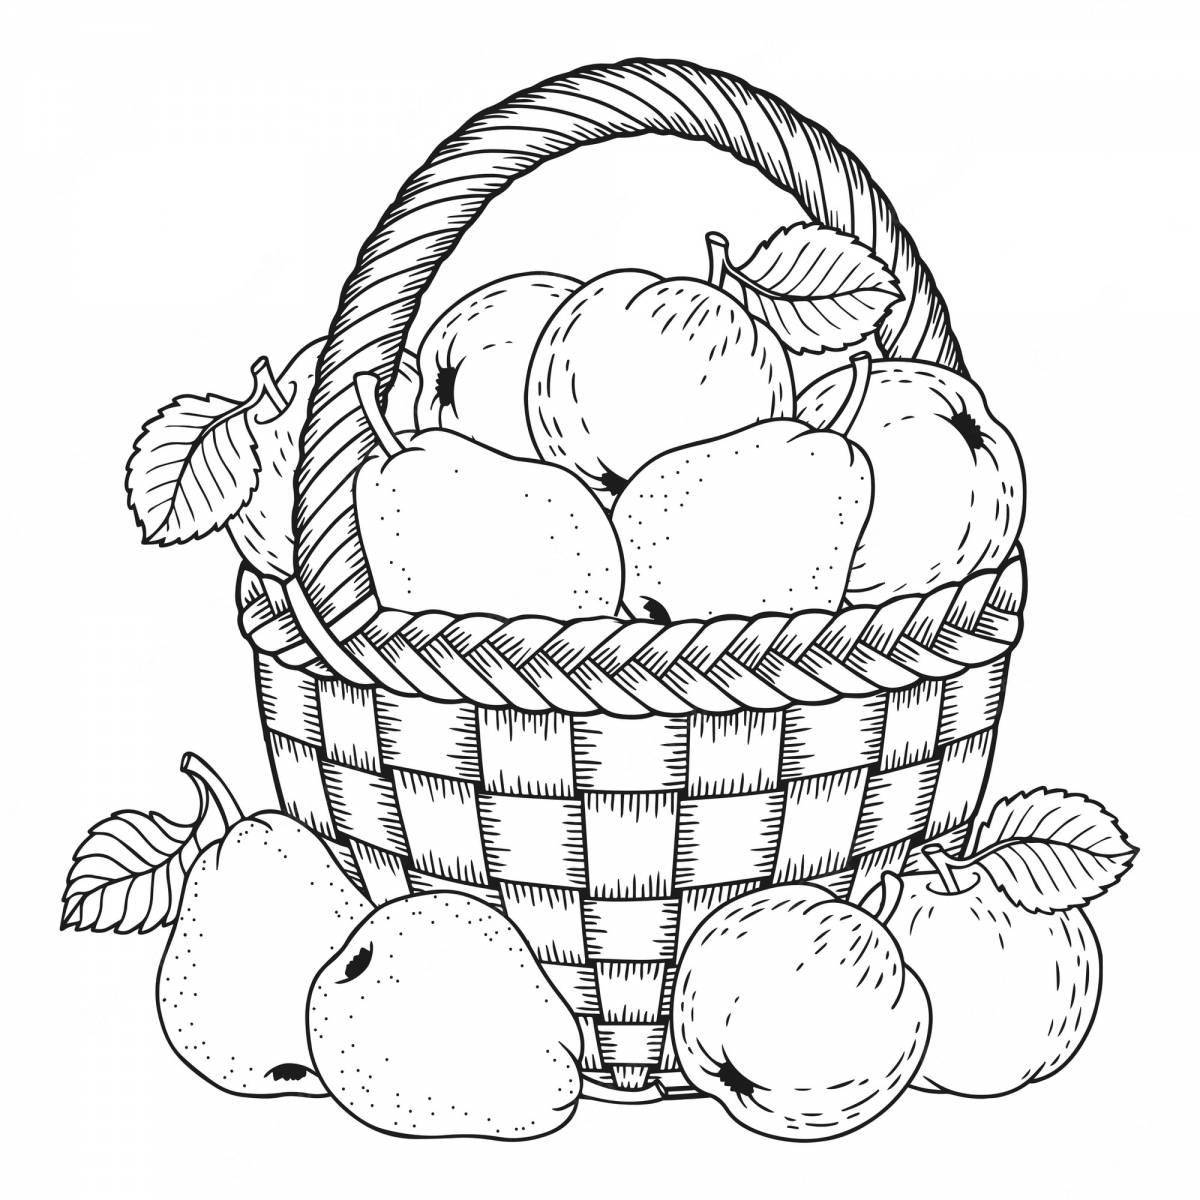 Shining harvest of fruits and vegetables in a basket